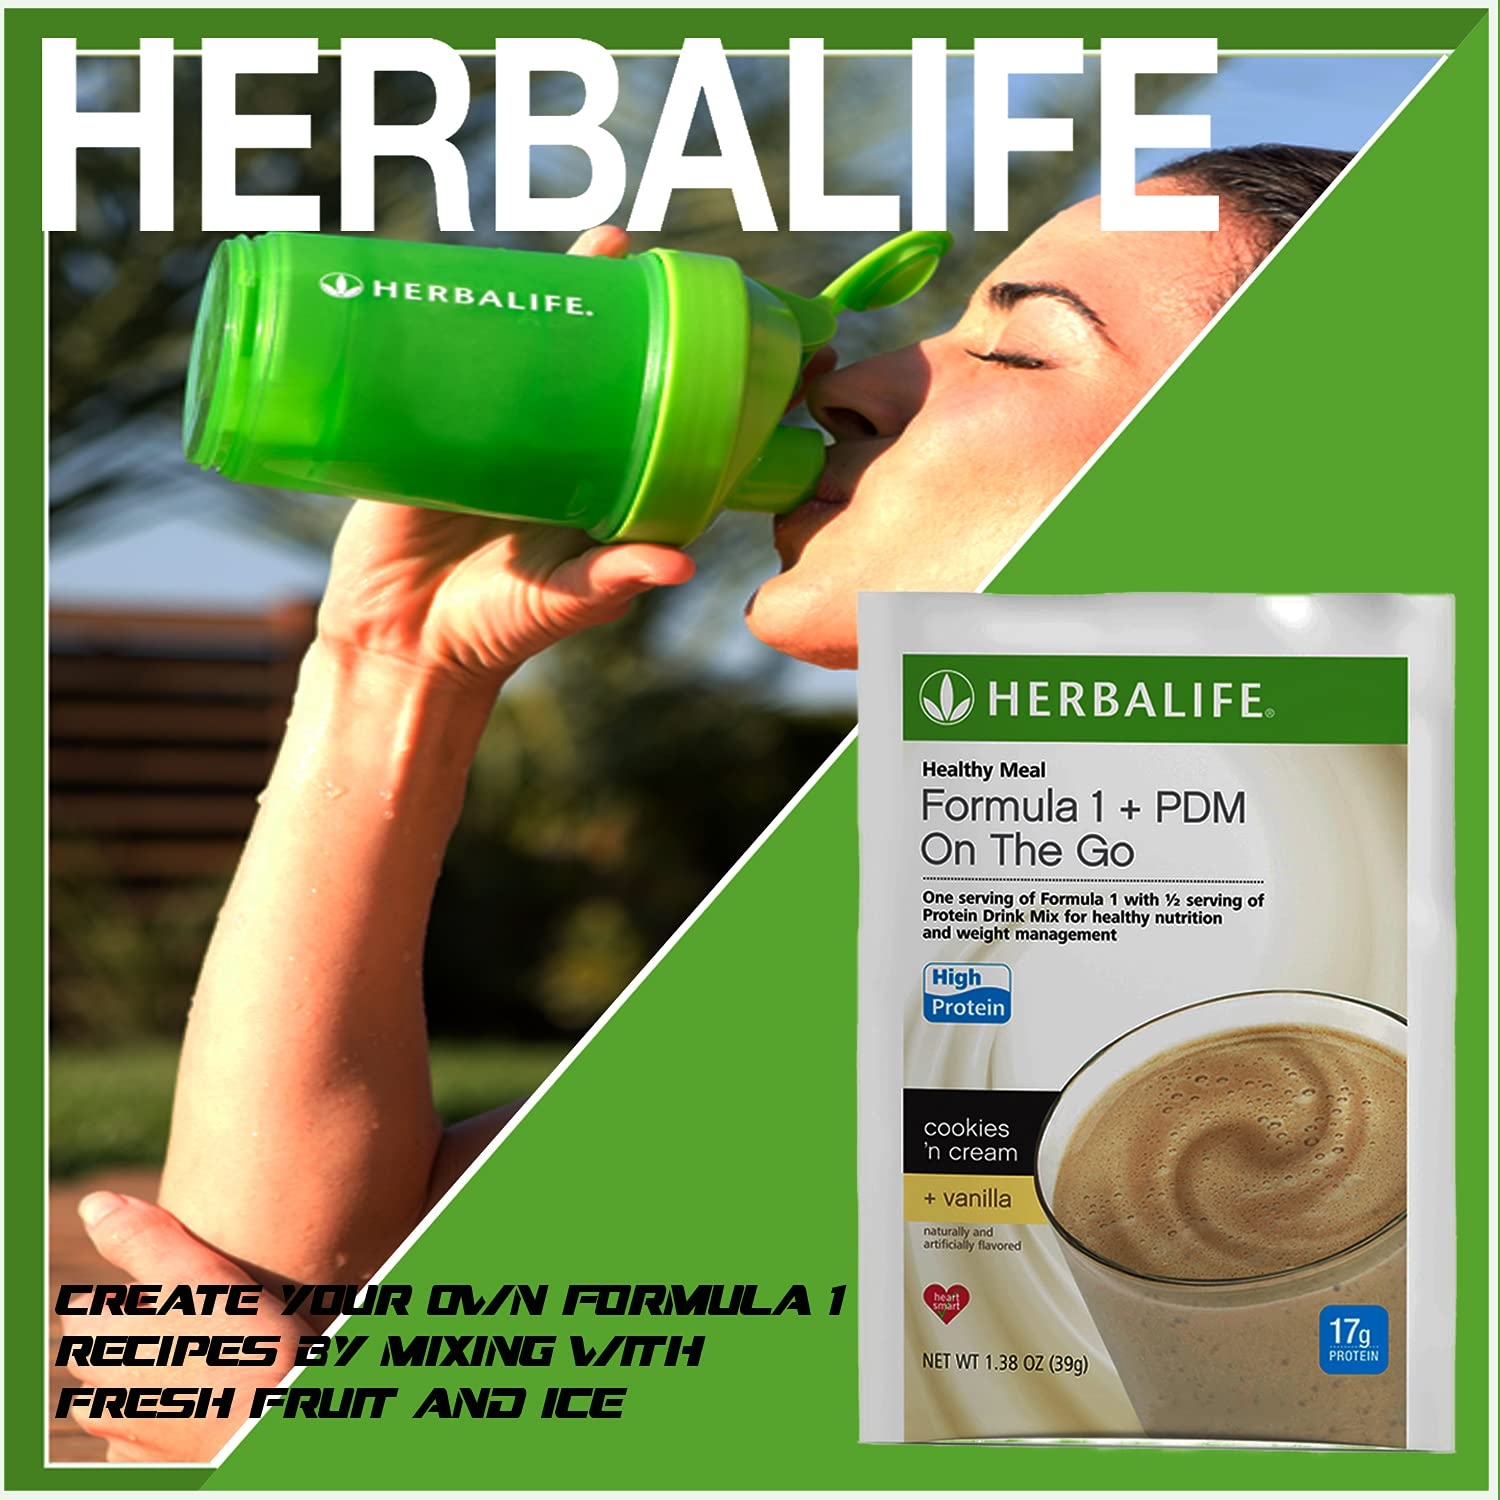 Herbalife Formula 1 + PDM On The Go: 17g of Protein 7 Packets per Box (Cookies and Cream + Vanilla), Protein For Energy and Nutrition, sustain Energy and Satisfy Hunger